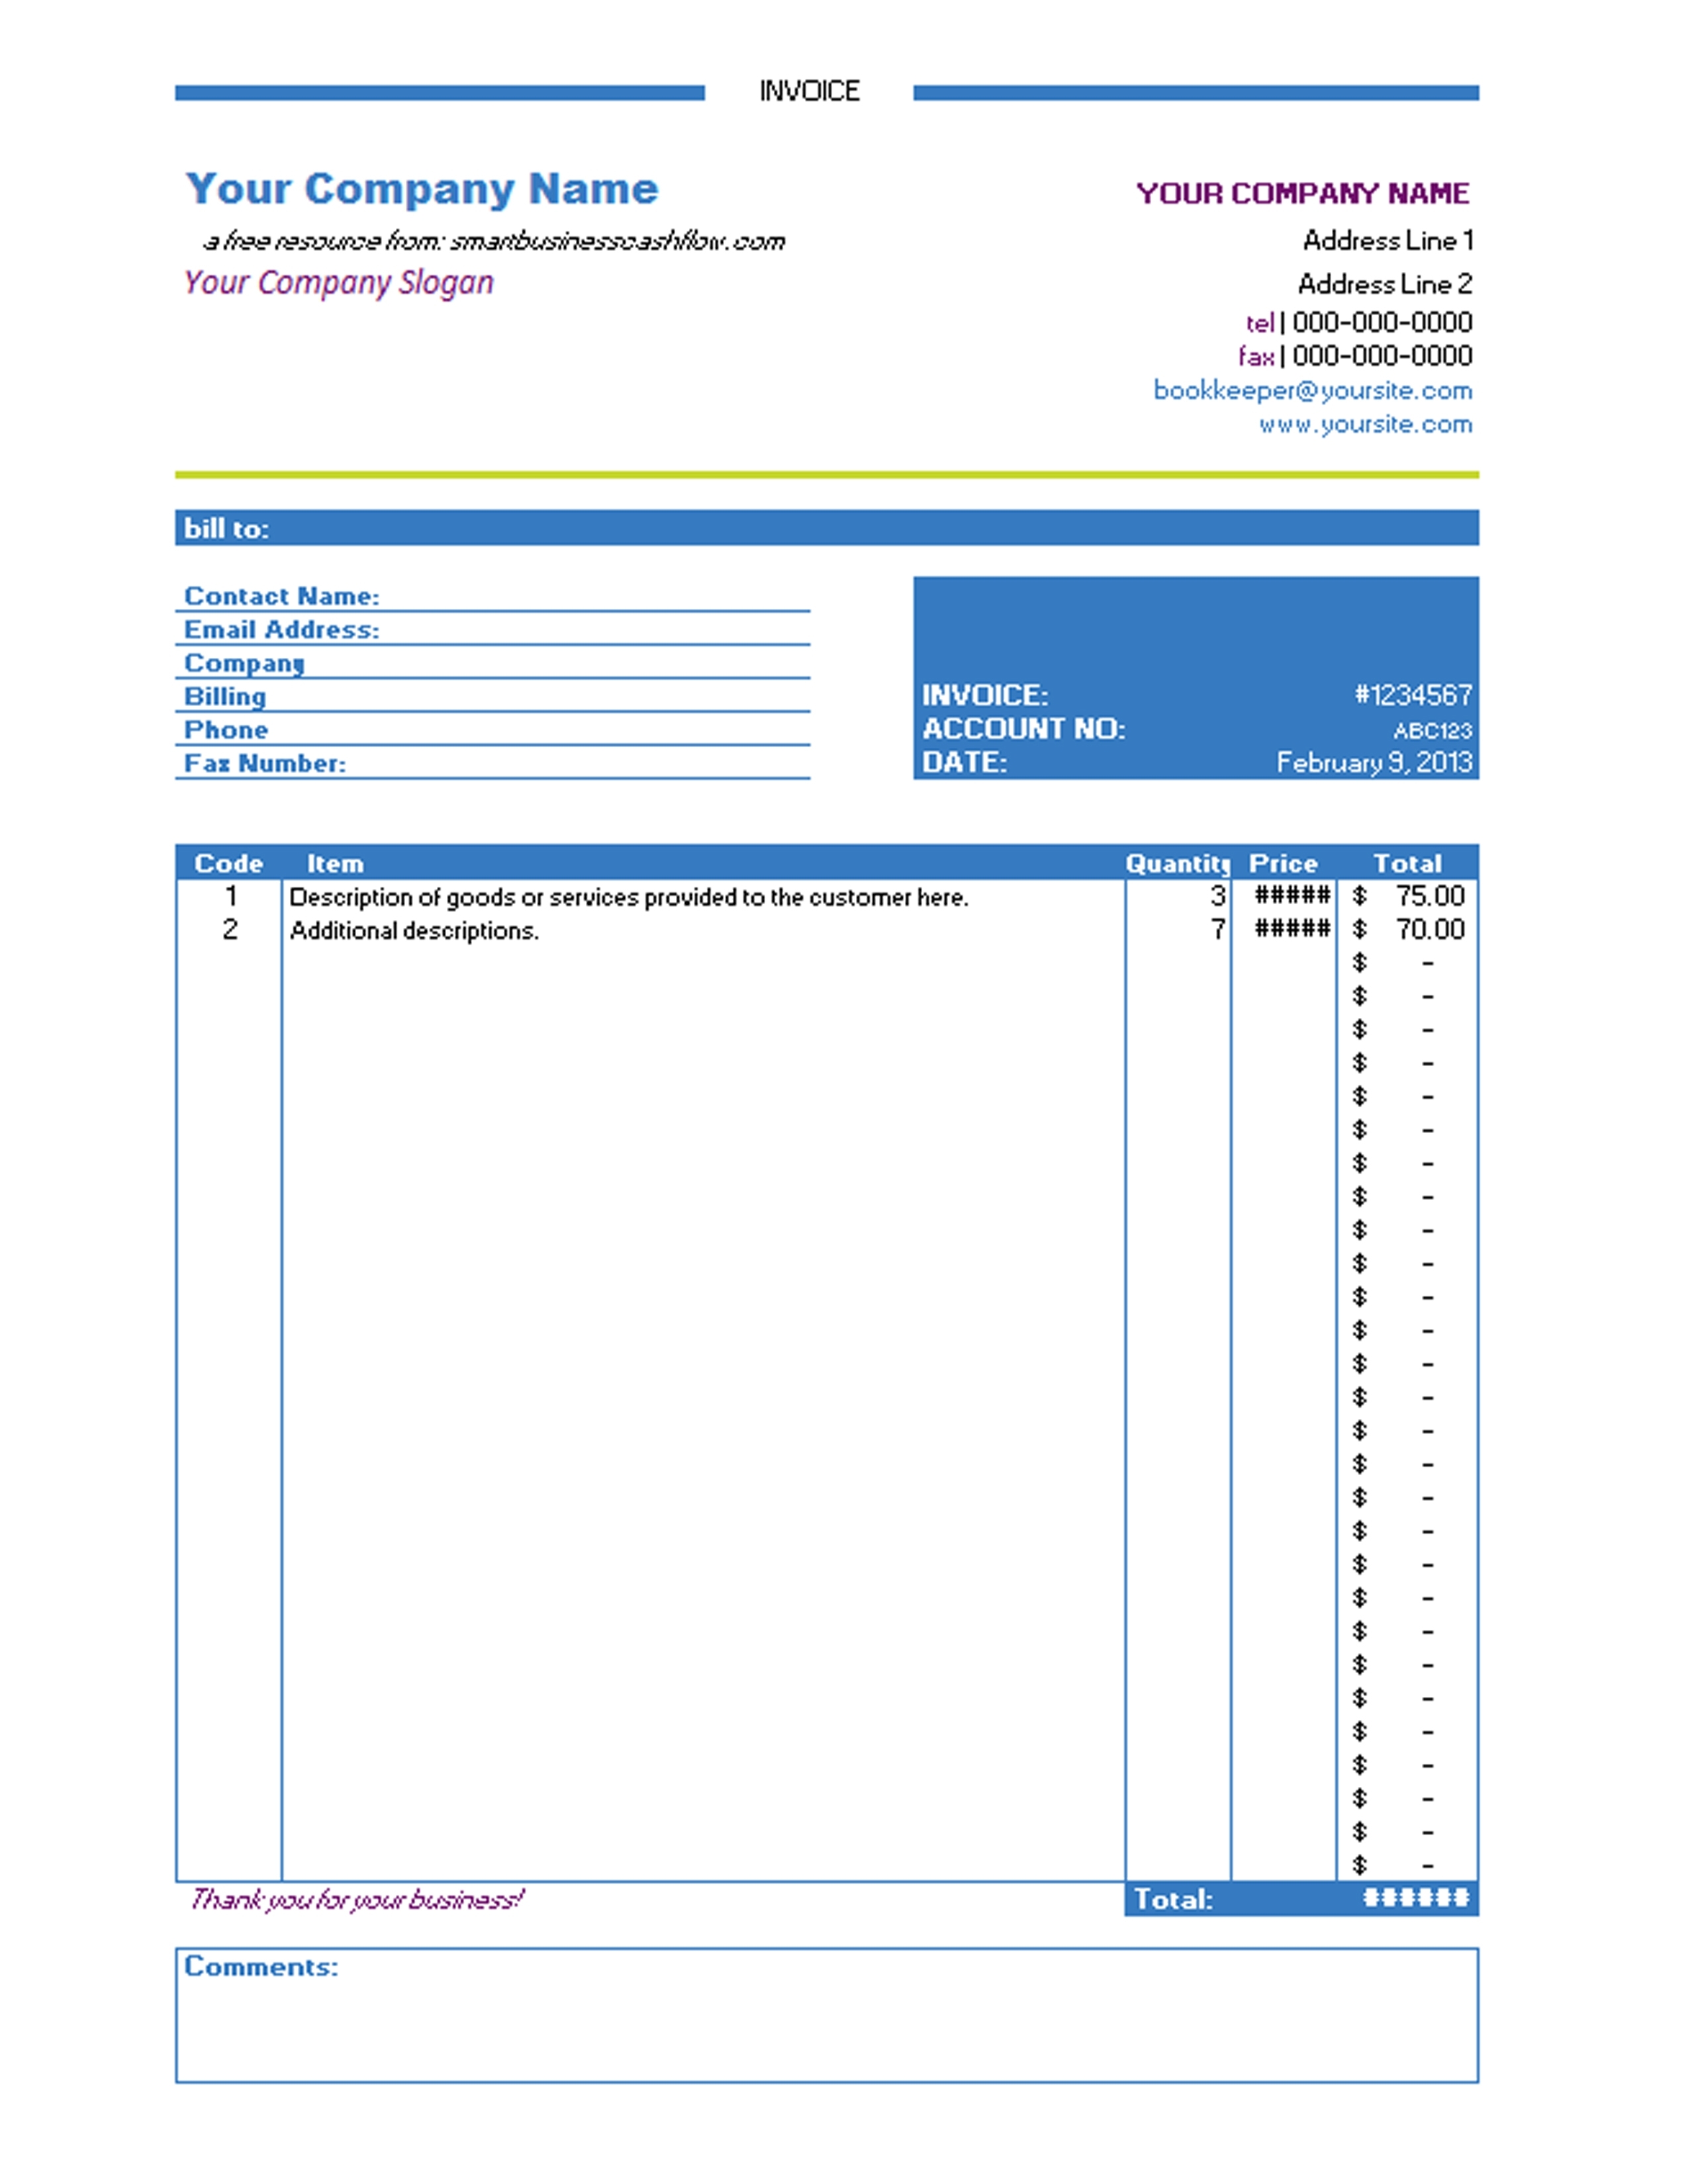 catering invoice template excel best photos of catering invoice create invoice excel